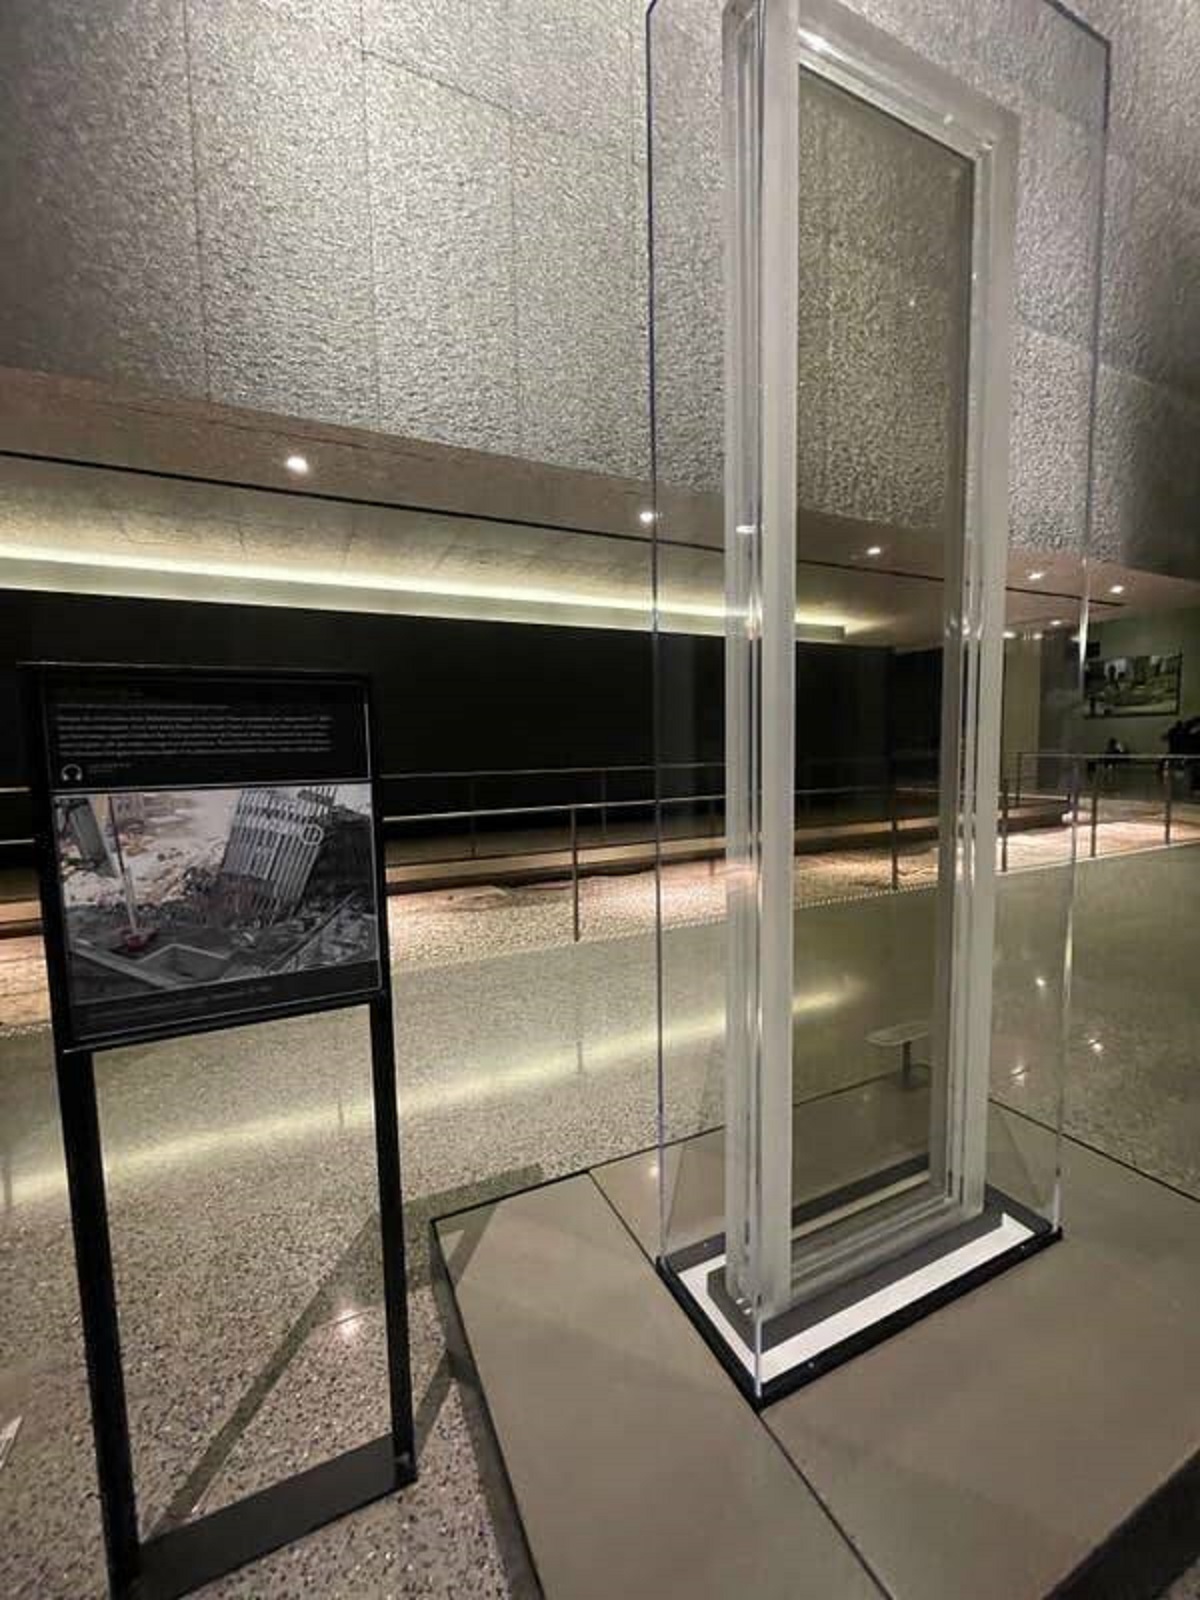 One panel of glass survived the 9/11 World Trade Center attacks. This is it: